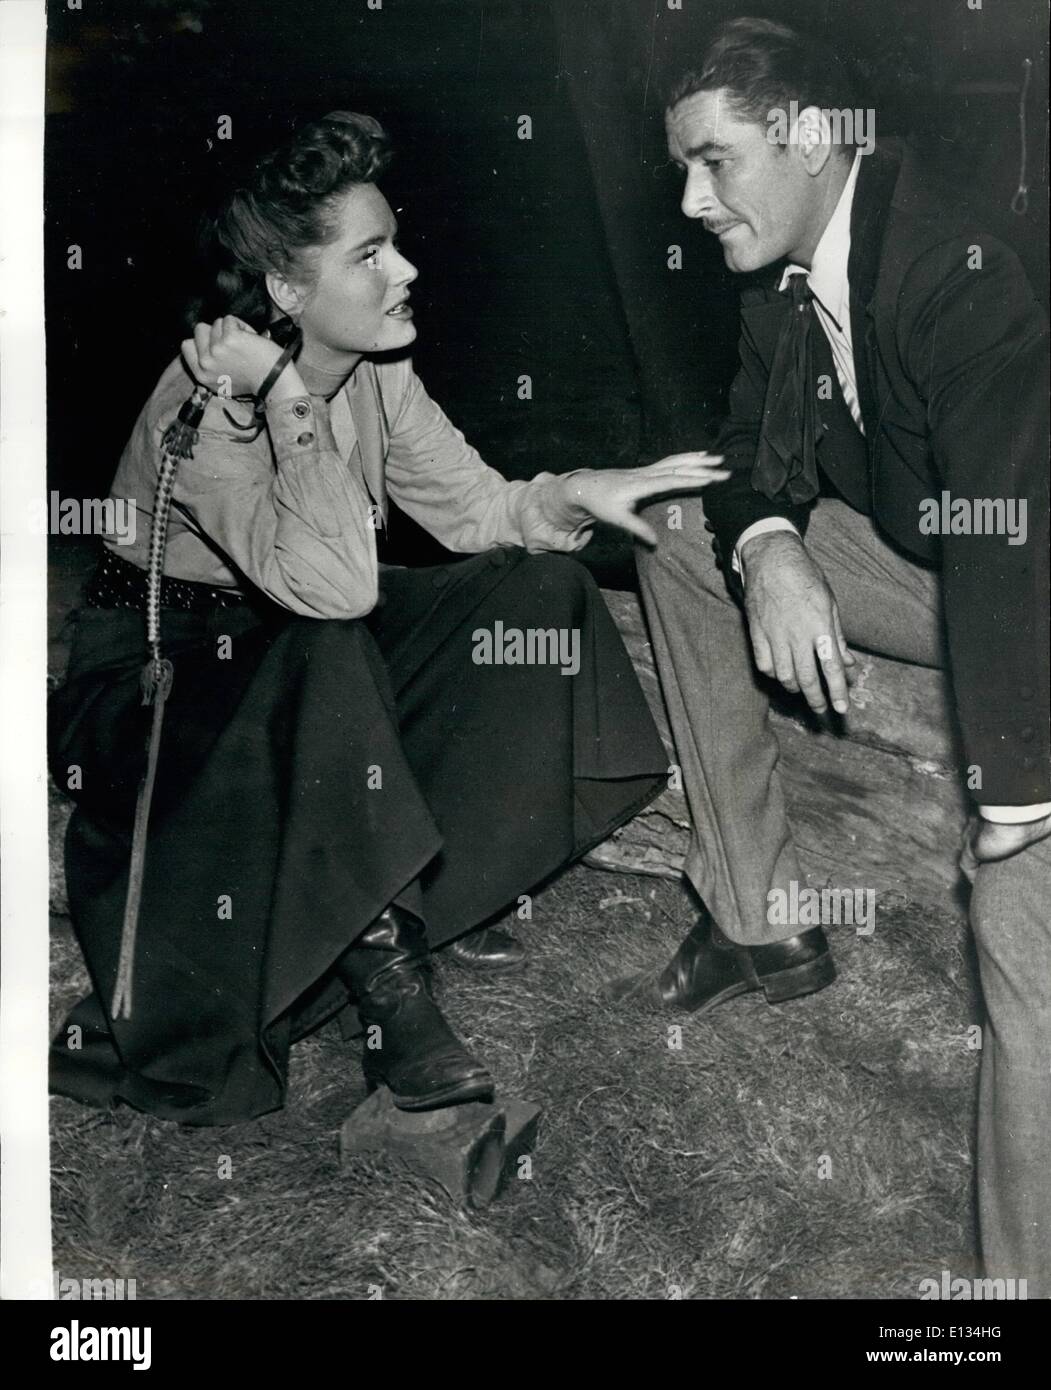 Feb. 28, 2012 - Errol Flynn Discusses His Forth Coming Marries With Star Alexis Smith: Alexis Smith and Errol Flynn seen as they have a quiet chat between scenes - in their Hollywood studios... Flynn is discussing his forthcoming marriage with Roumanian Princess Ghika.. He was recently divorced from Mora Eddington. Stock Photo